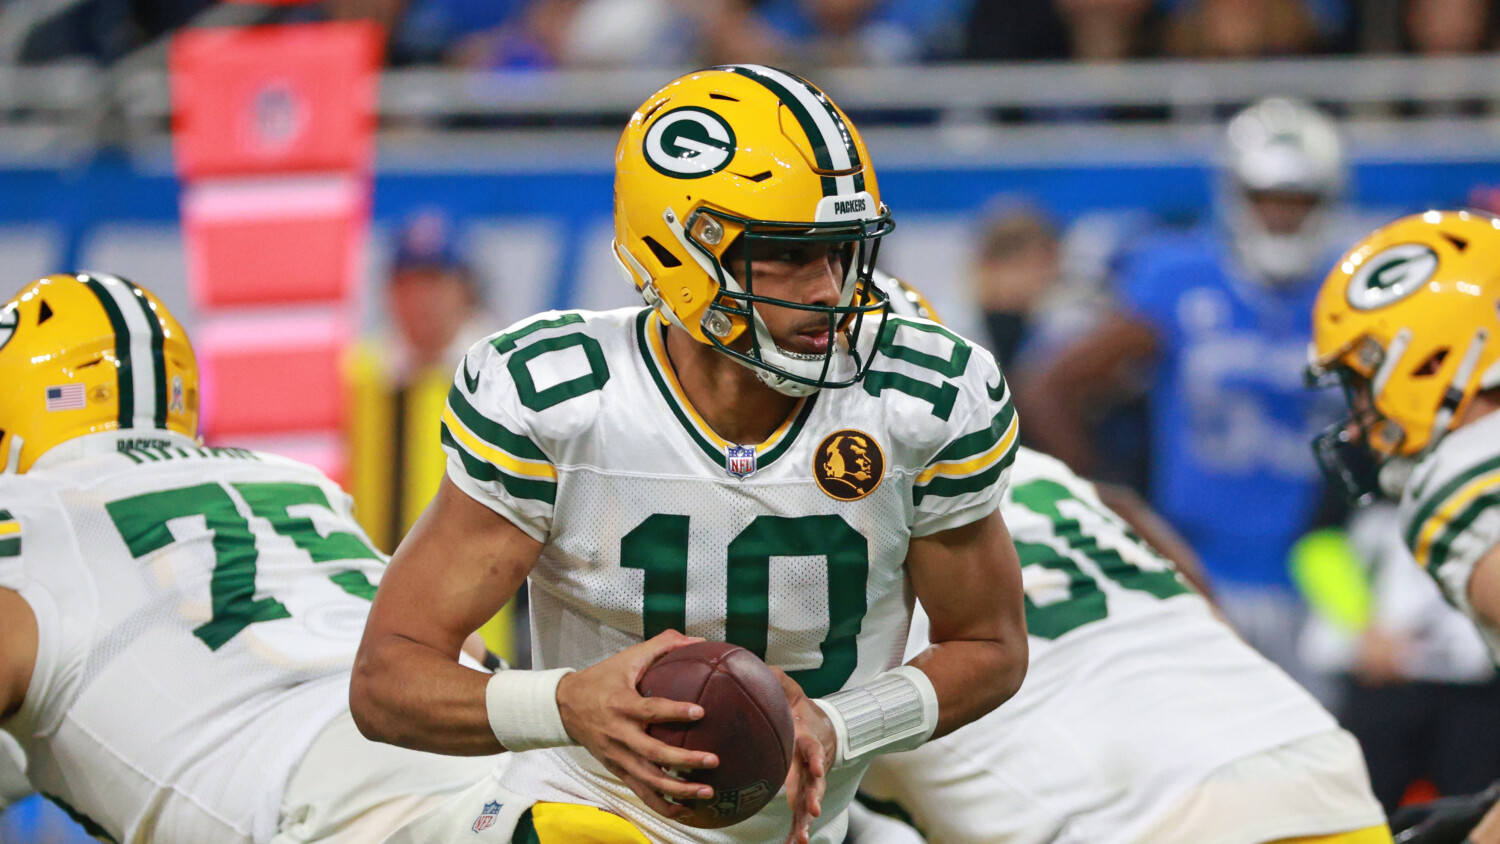 Chiefs vs. Packers: Is Green Bay an Underdog to Watch on Sunday?